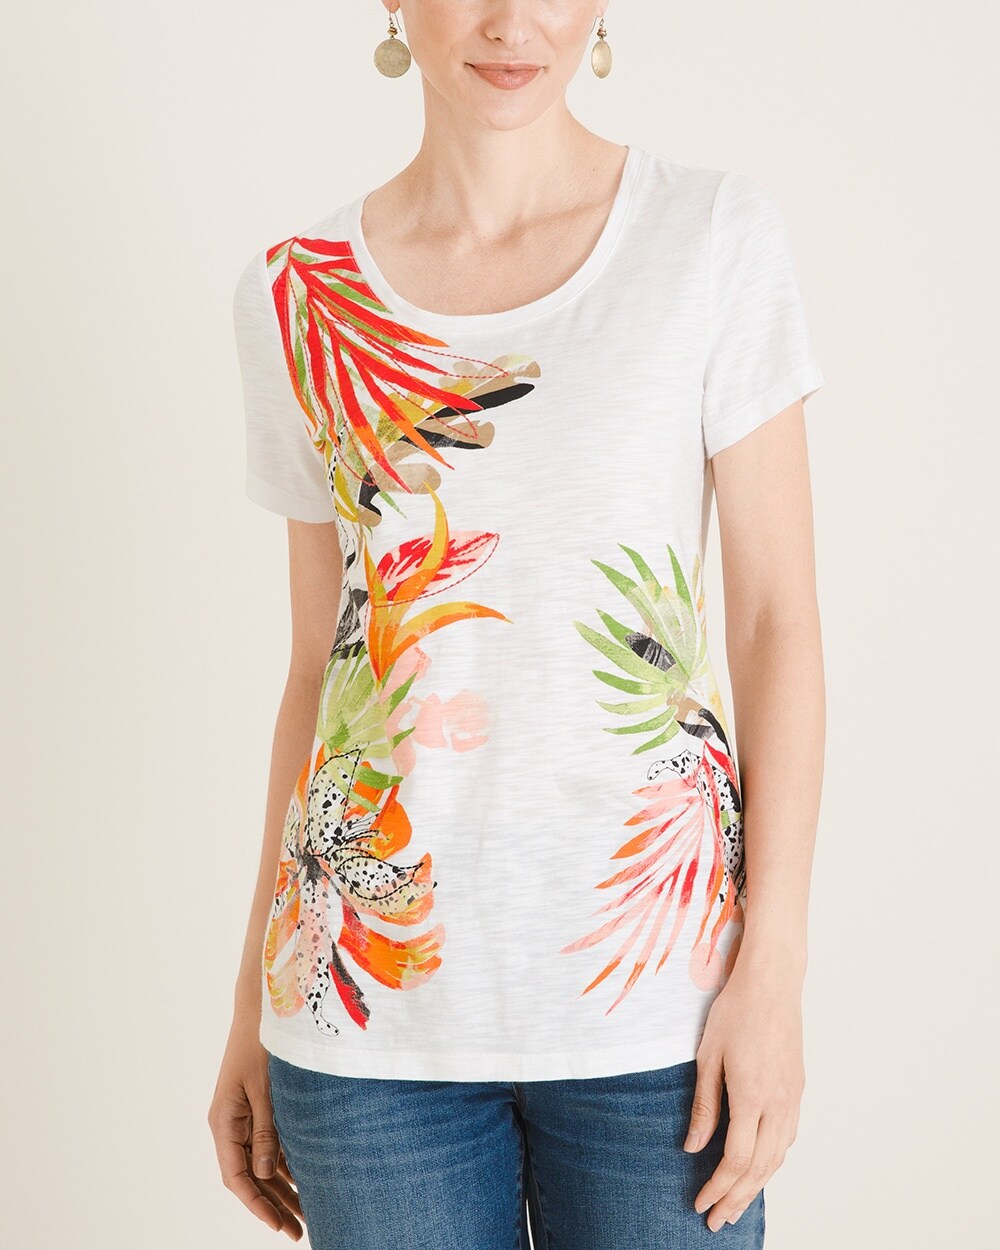 Embroidered Tropical-Print Tee